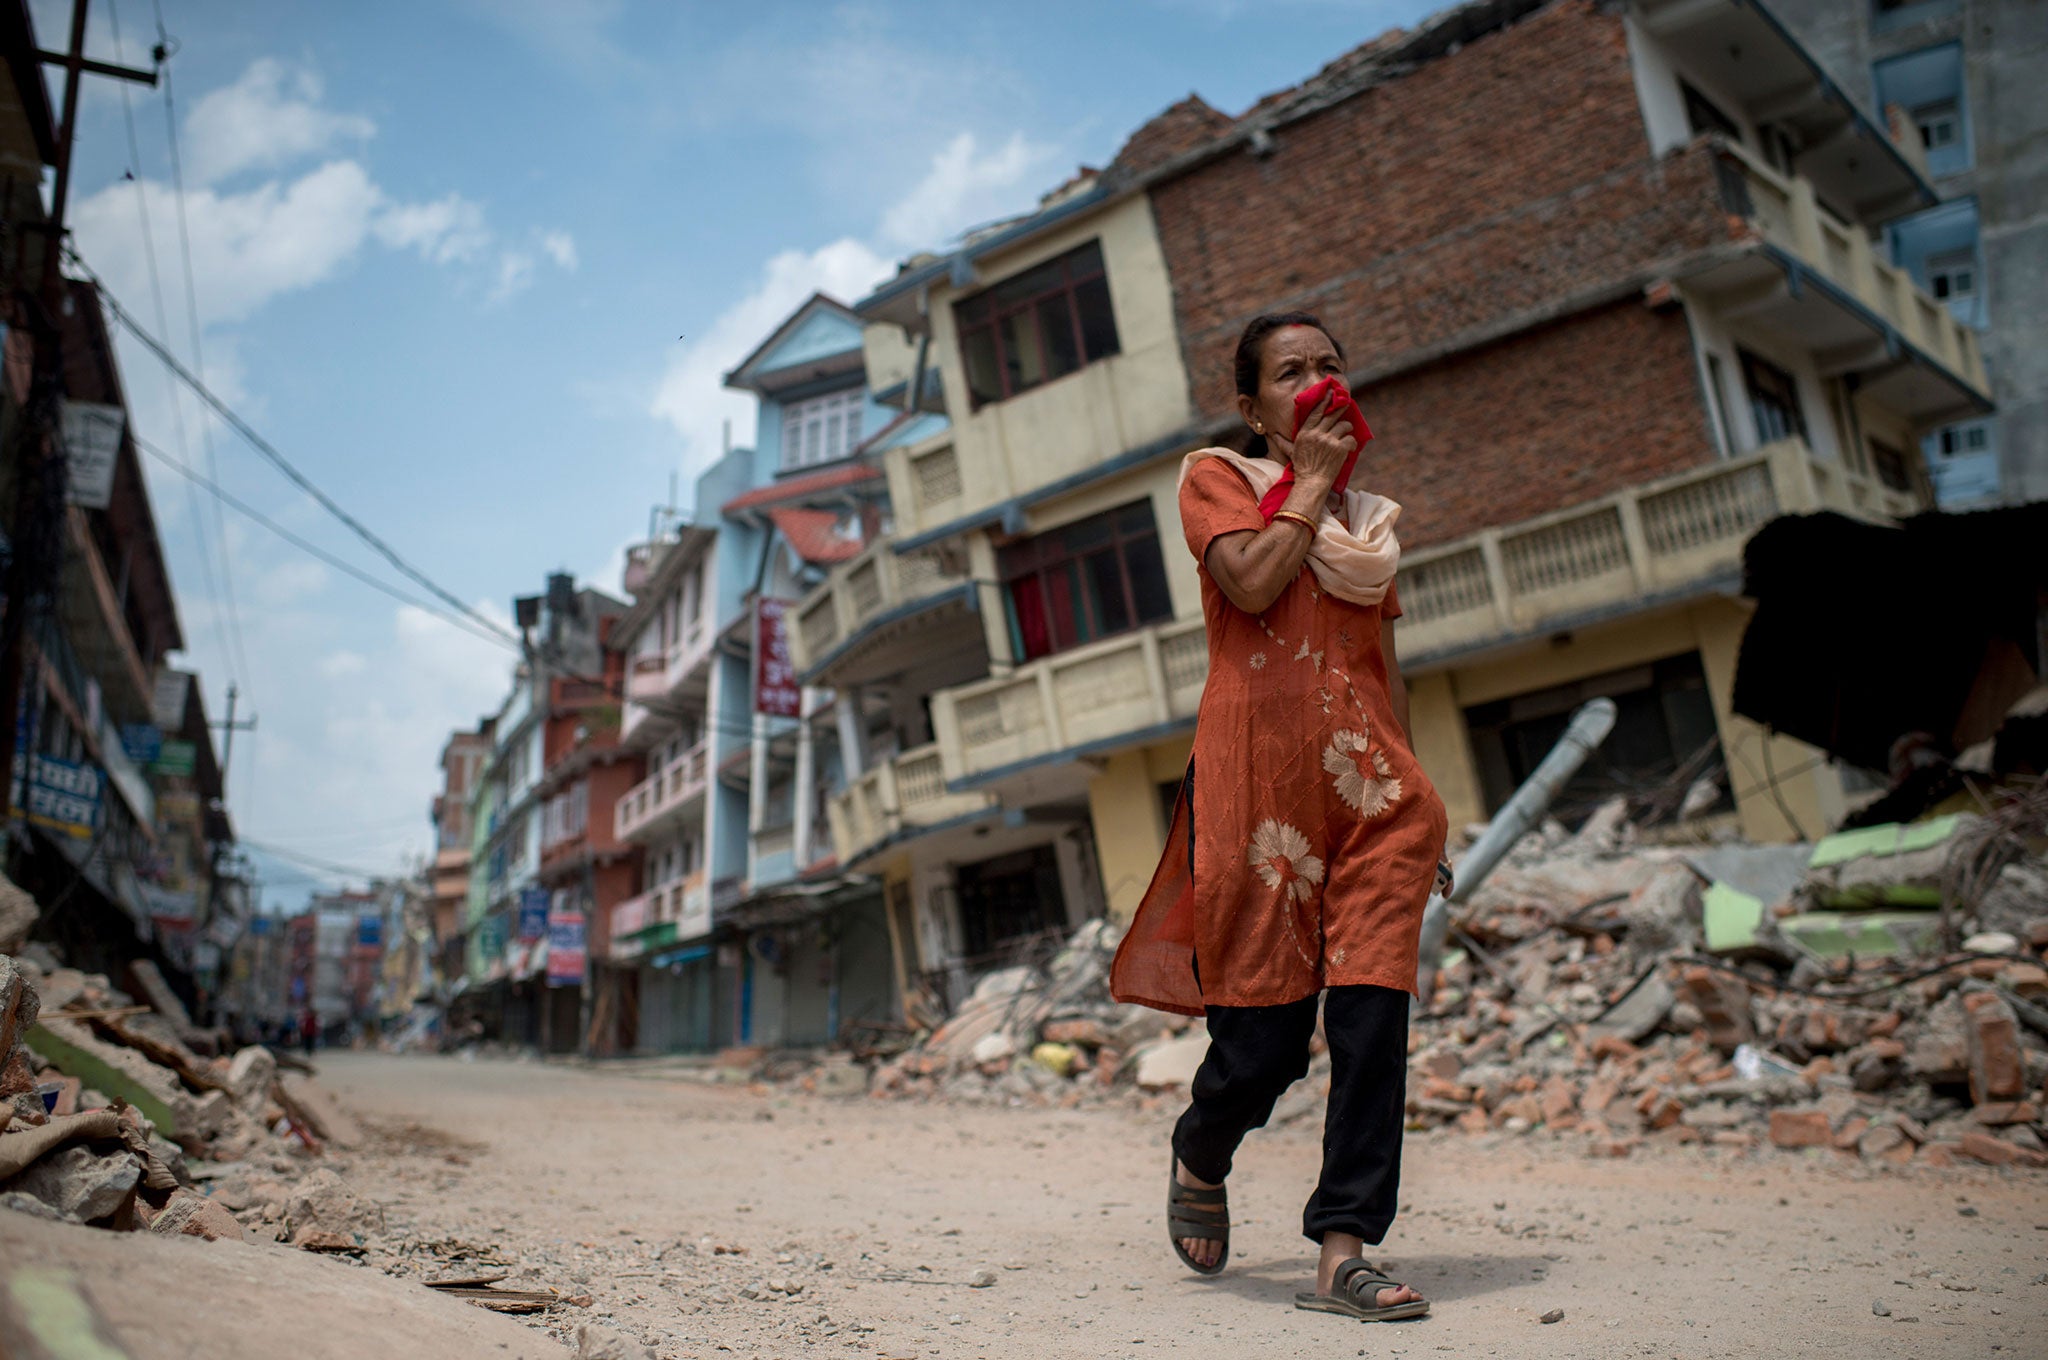 A woman walks past the rubble of destroyed buildings following a second major earthquake in Kathmandu, Nepal